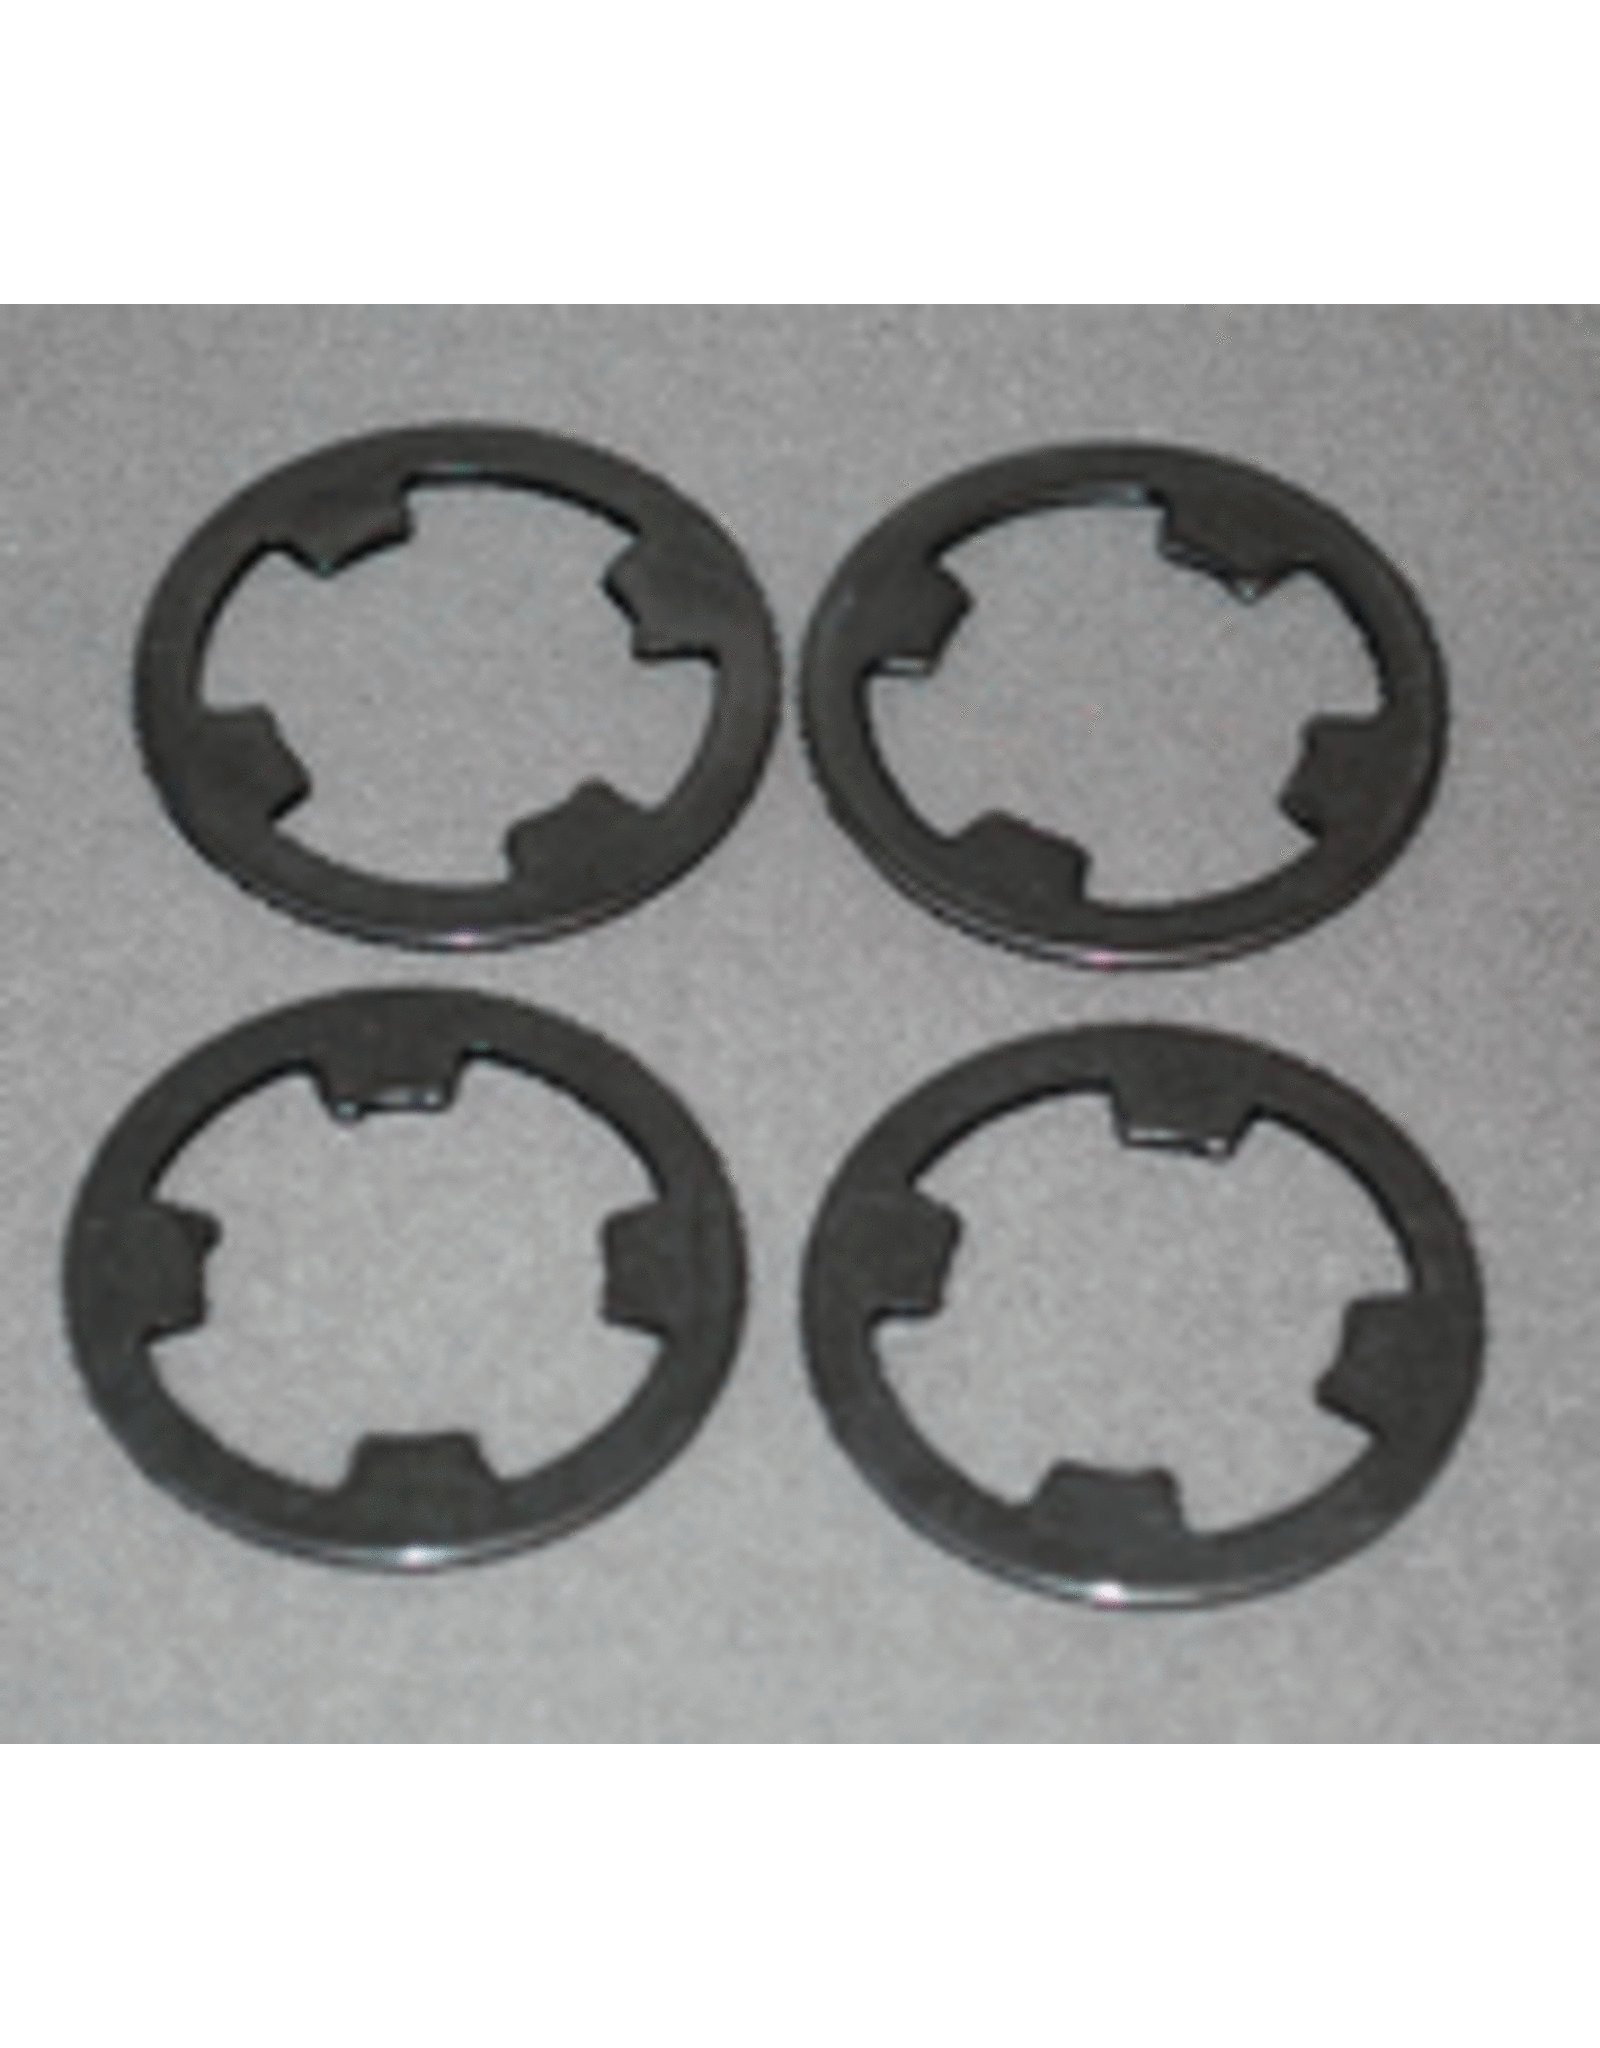 IRS IRS-2511 Ultra Lite Weight D-Rings (4)